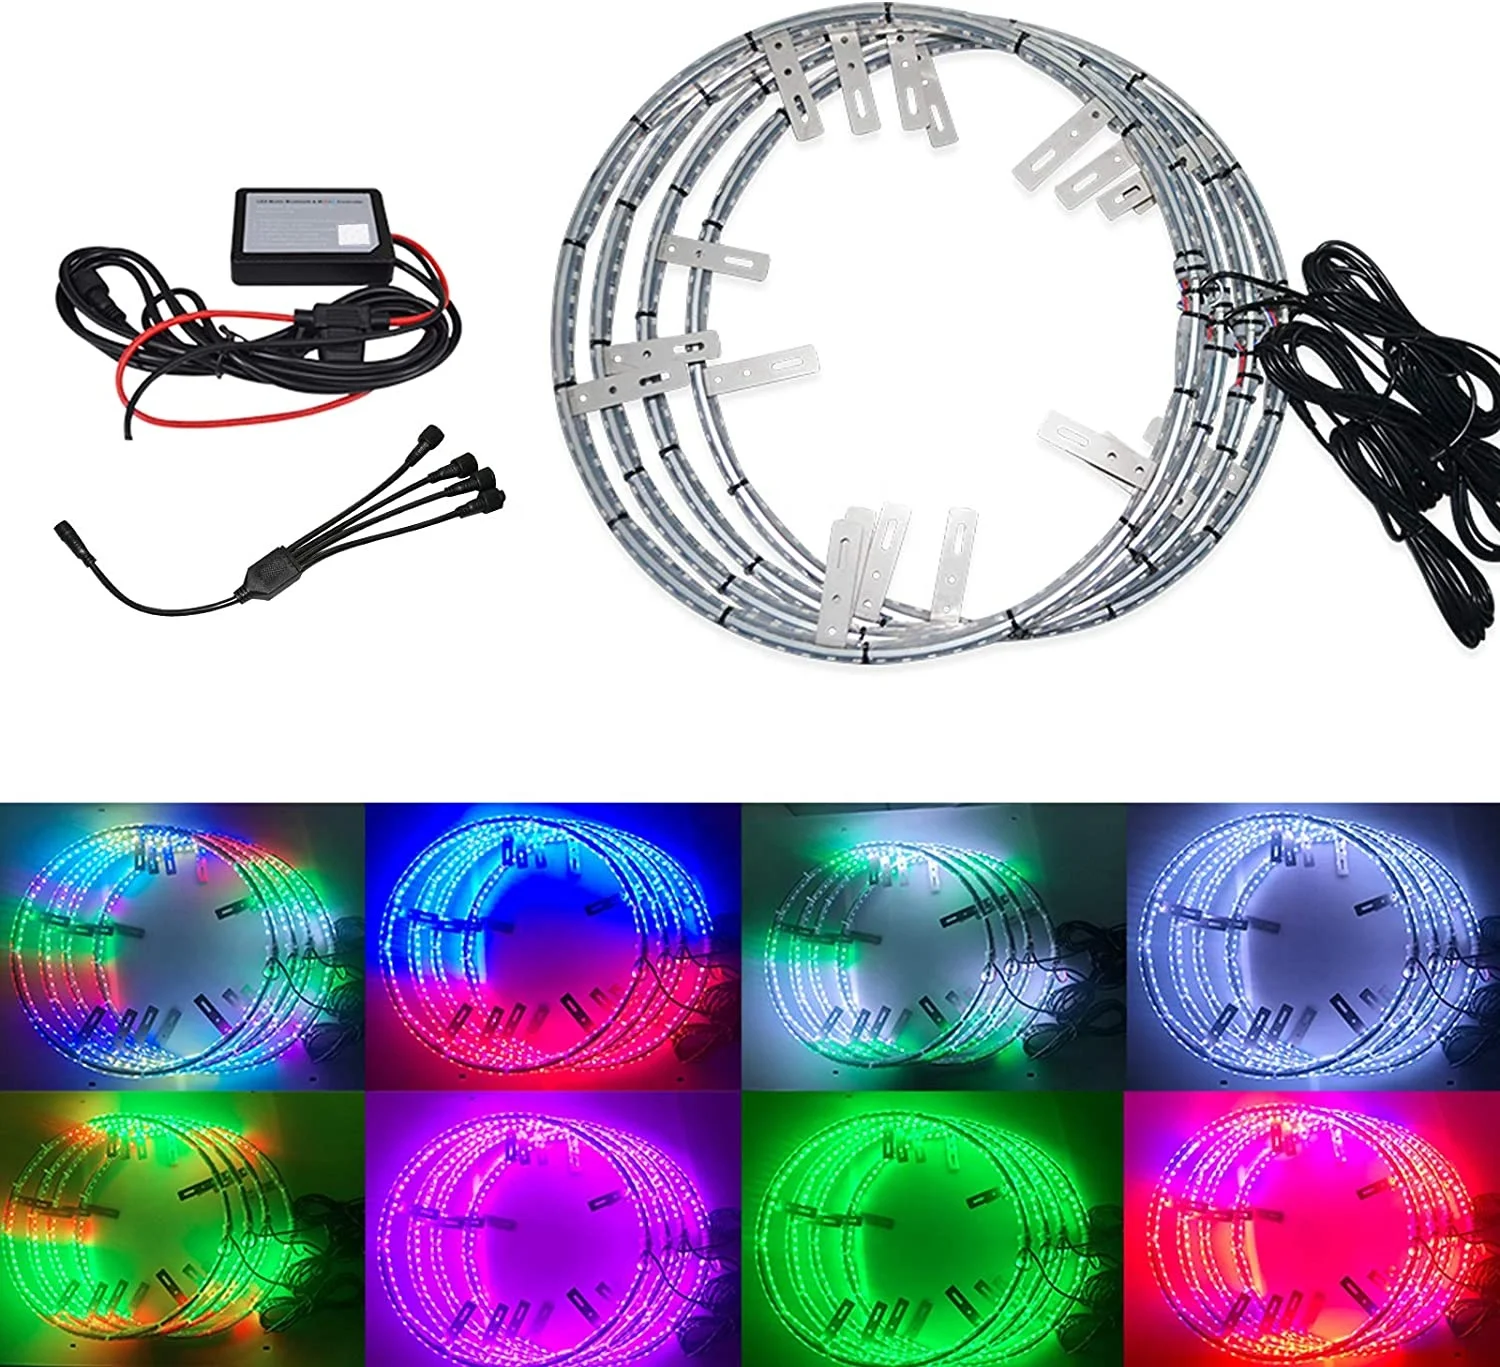 17.5'' Dream Chasing Color Flow Double Row Dual Raw IP68 Waterproof 624Leds Brightest Strobe Led Wheel Ring Lights Rim Lights